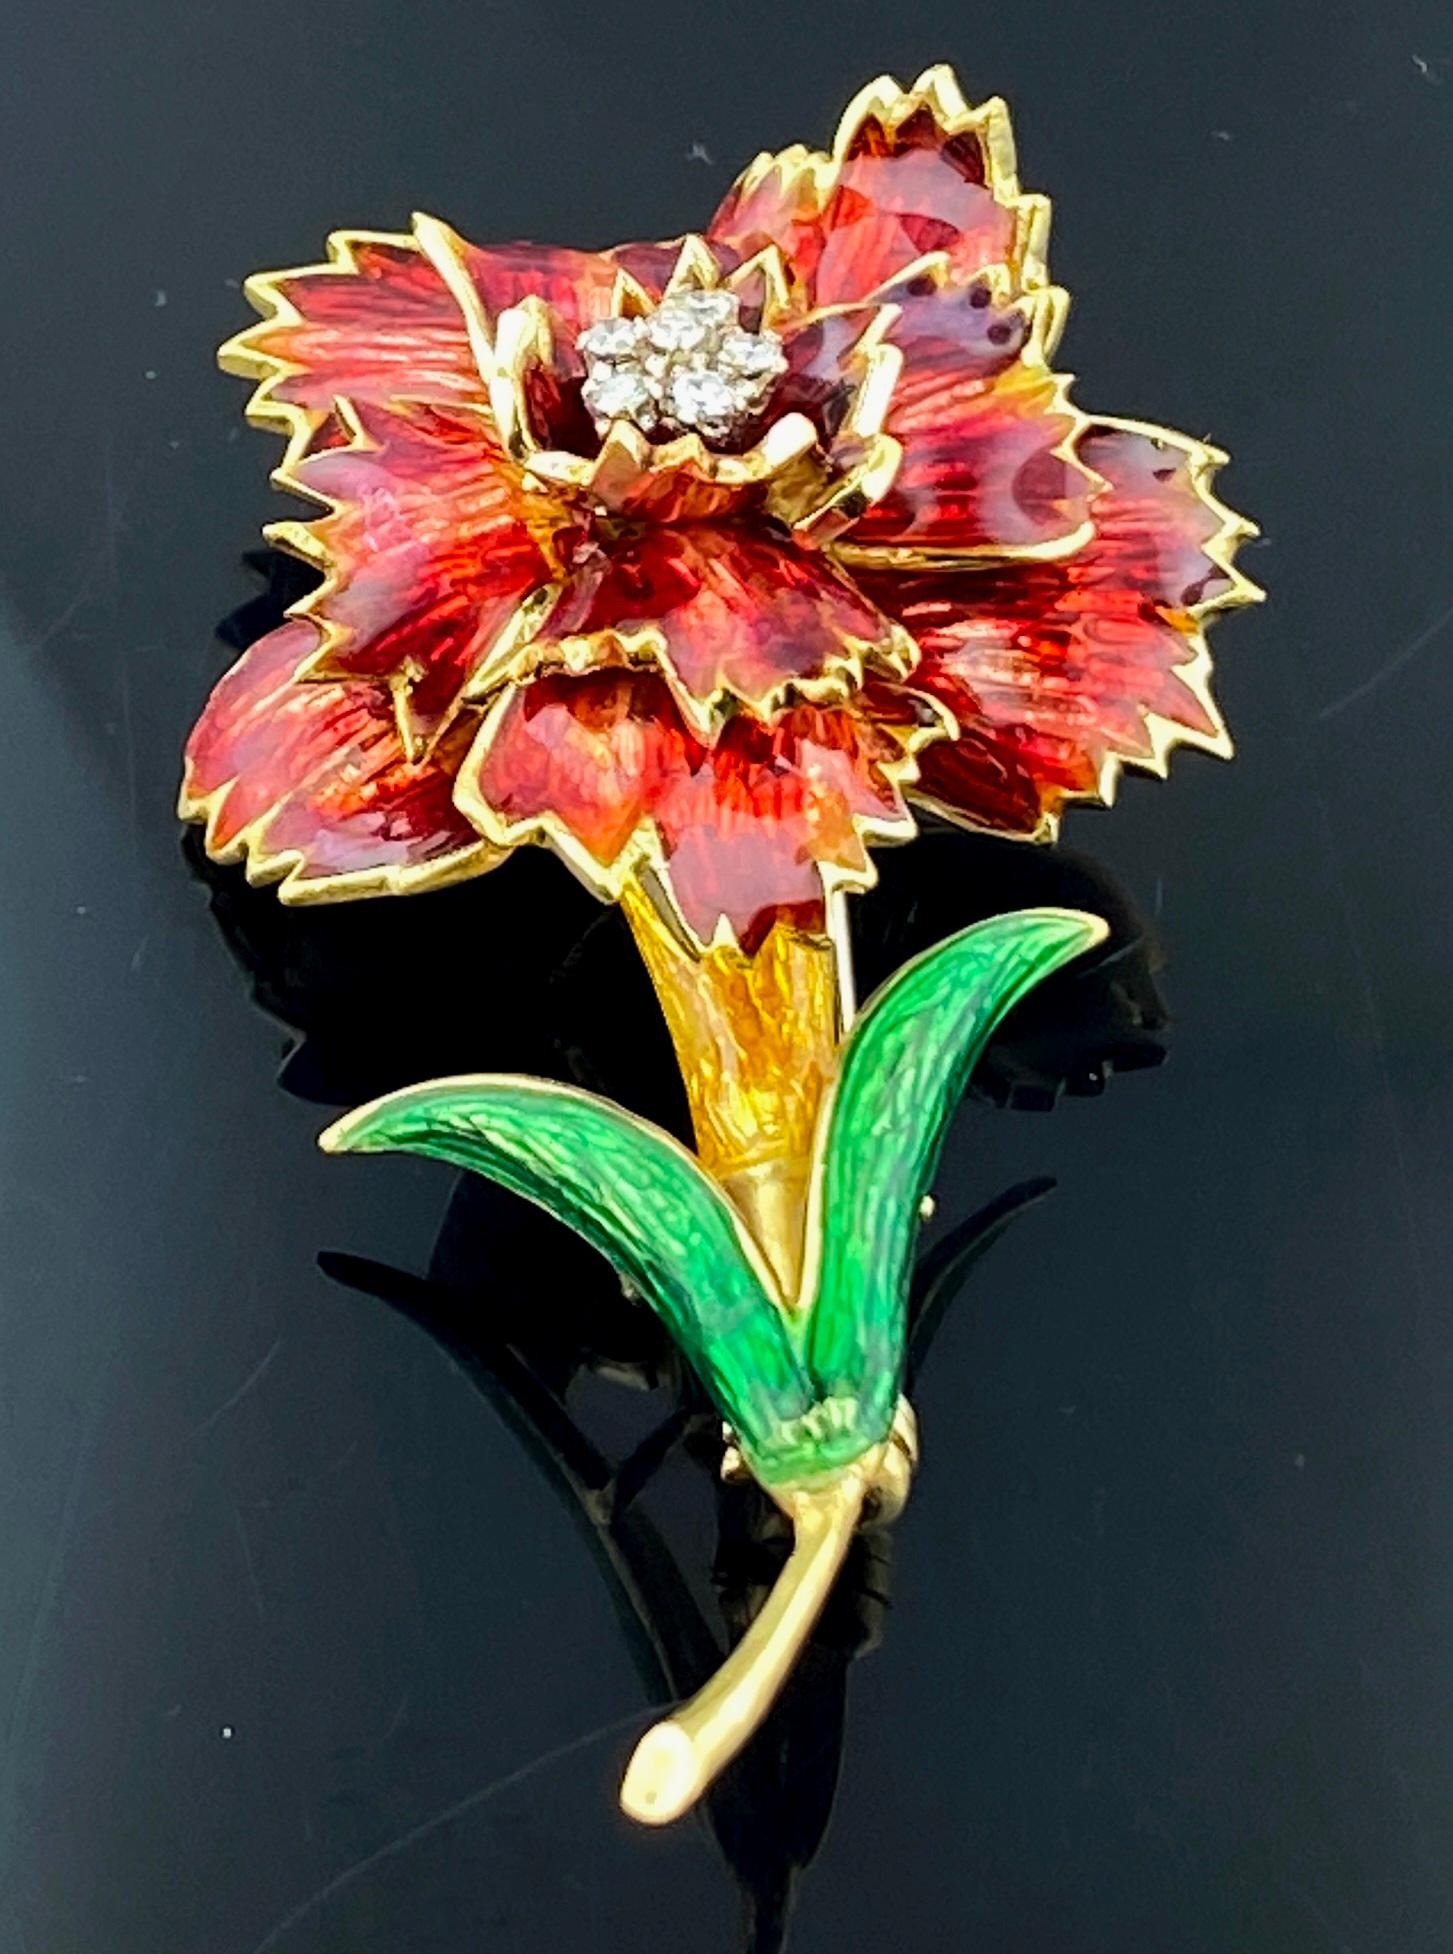 Set in 18 karat yellow gold, weighing 15 grams, is a lovely flower on a stem, painted with vivid colors and including 6 small round brilliant cut diamonds in the center.